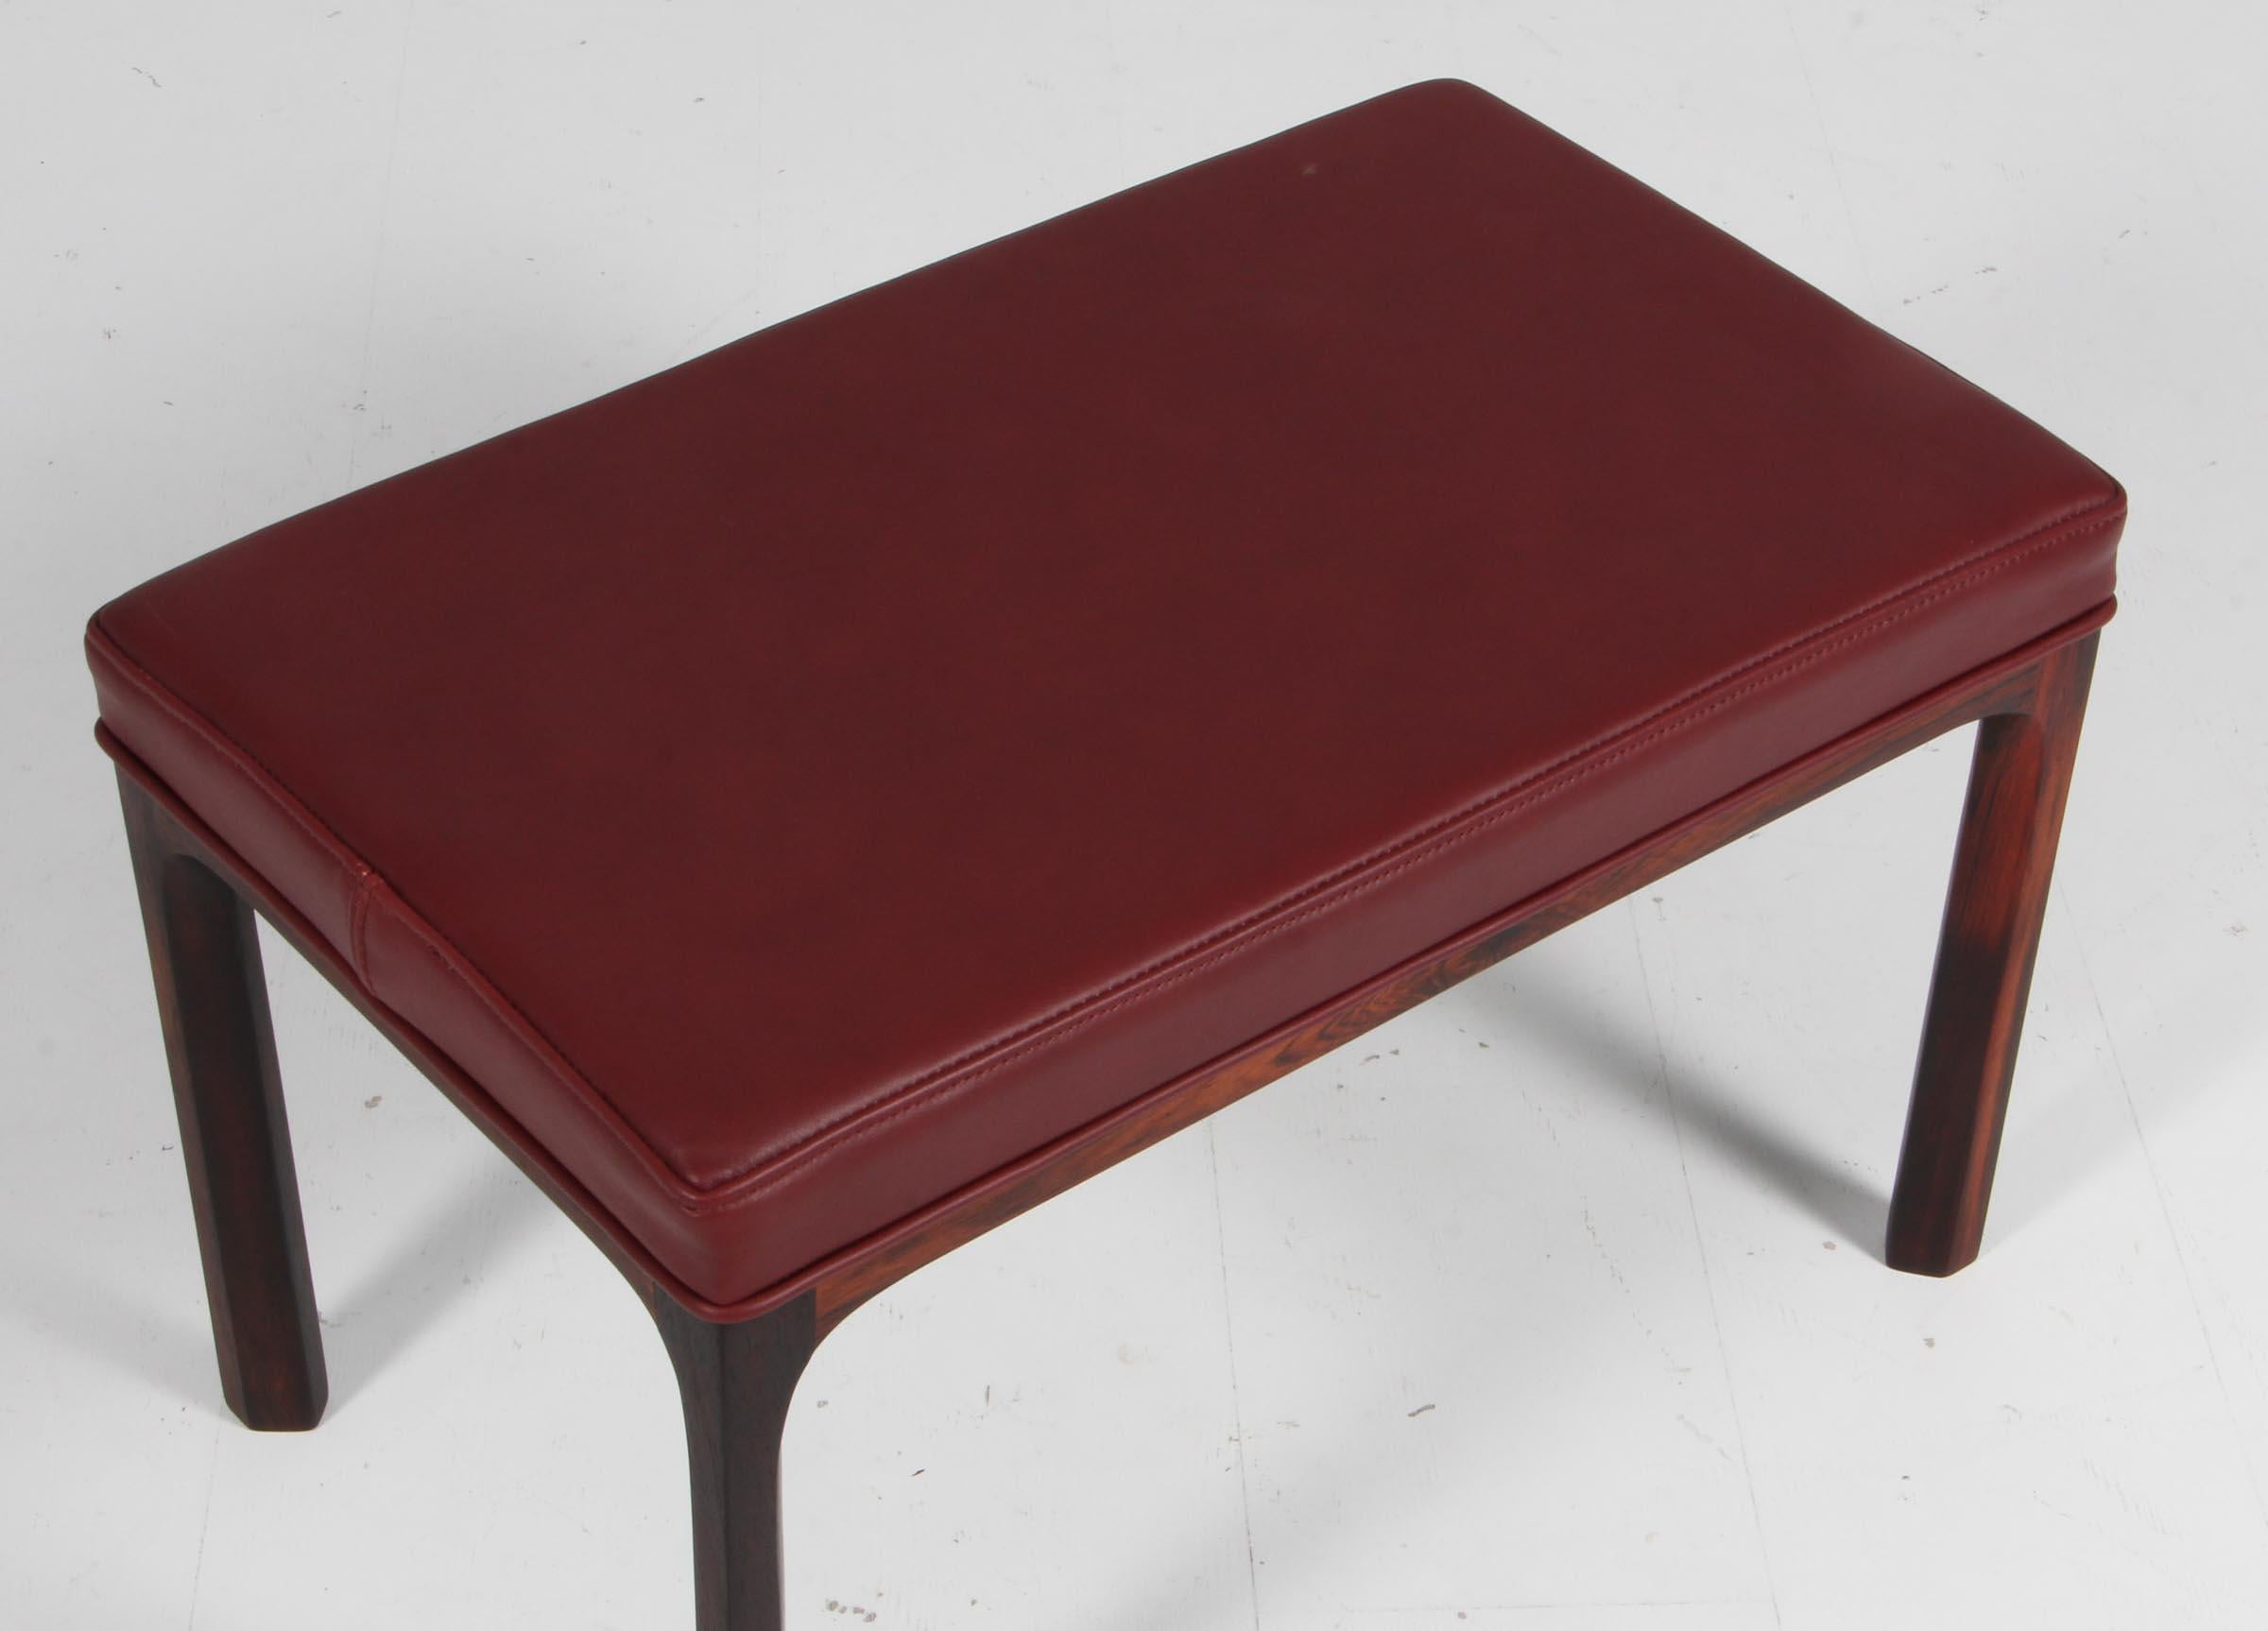 Kai Kristiansen ottoman with new upholstered seat in in Indian red elegance full grain aniline leather.

Made of solid rosewood.

Made by Aksel Kjersgaard 1960s.